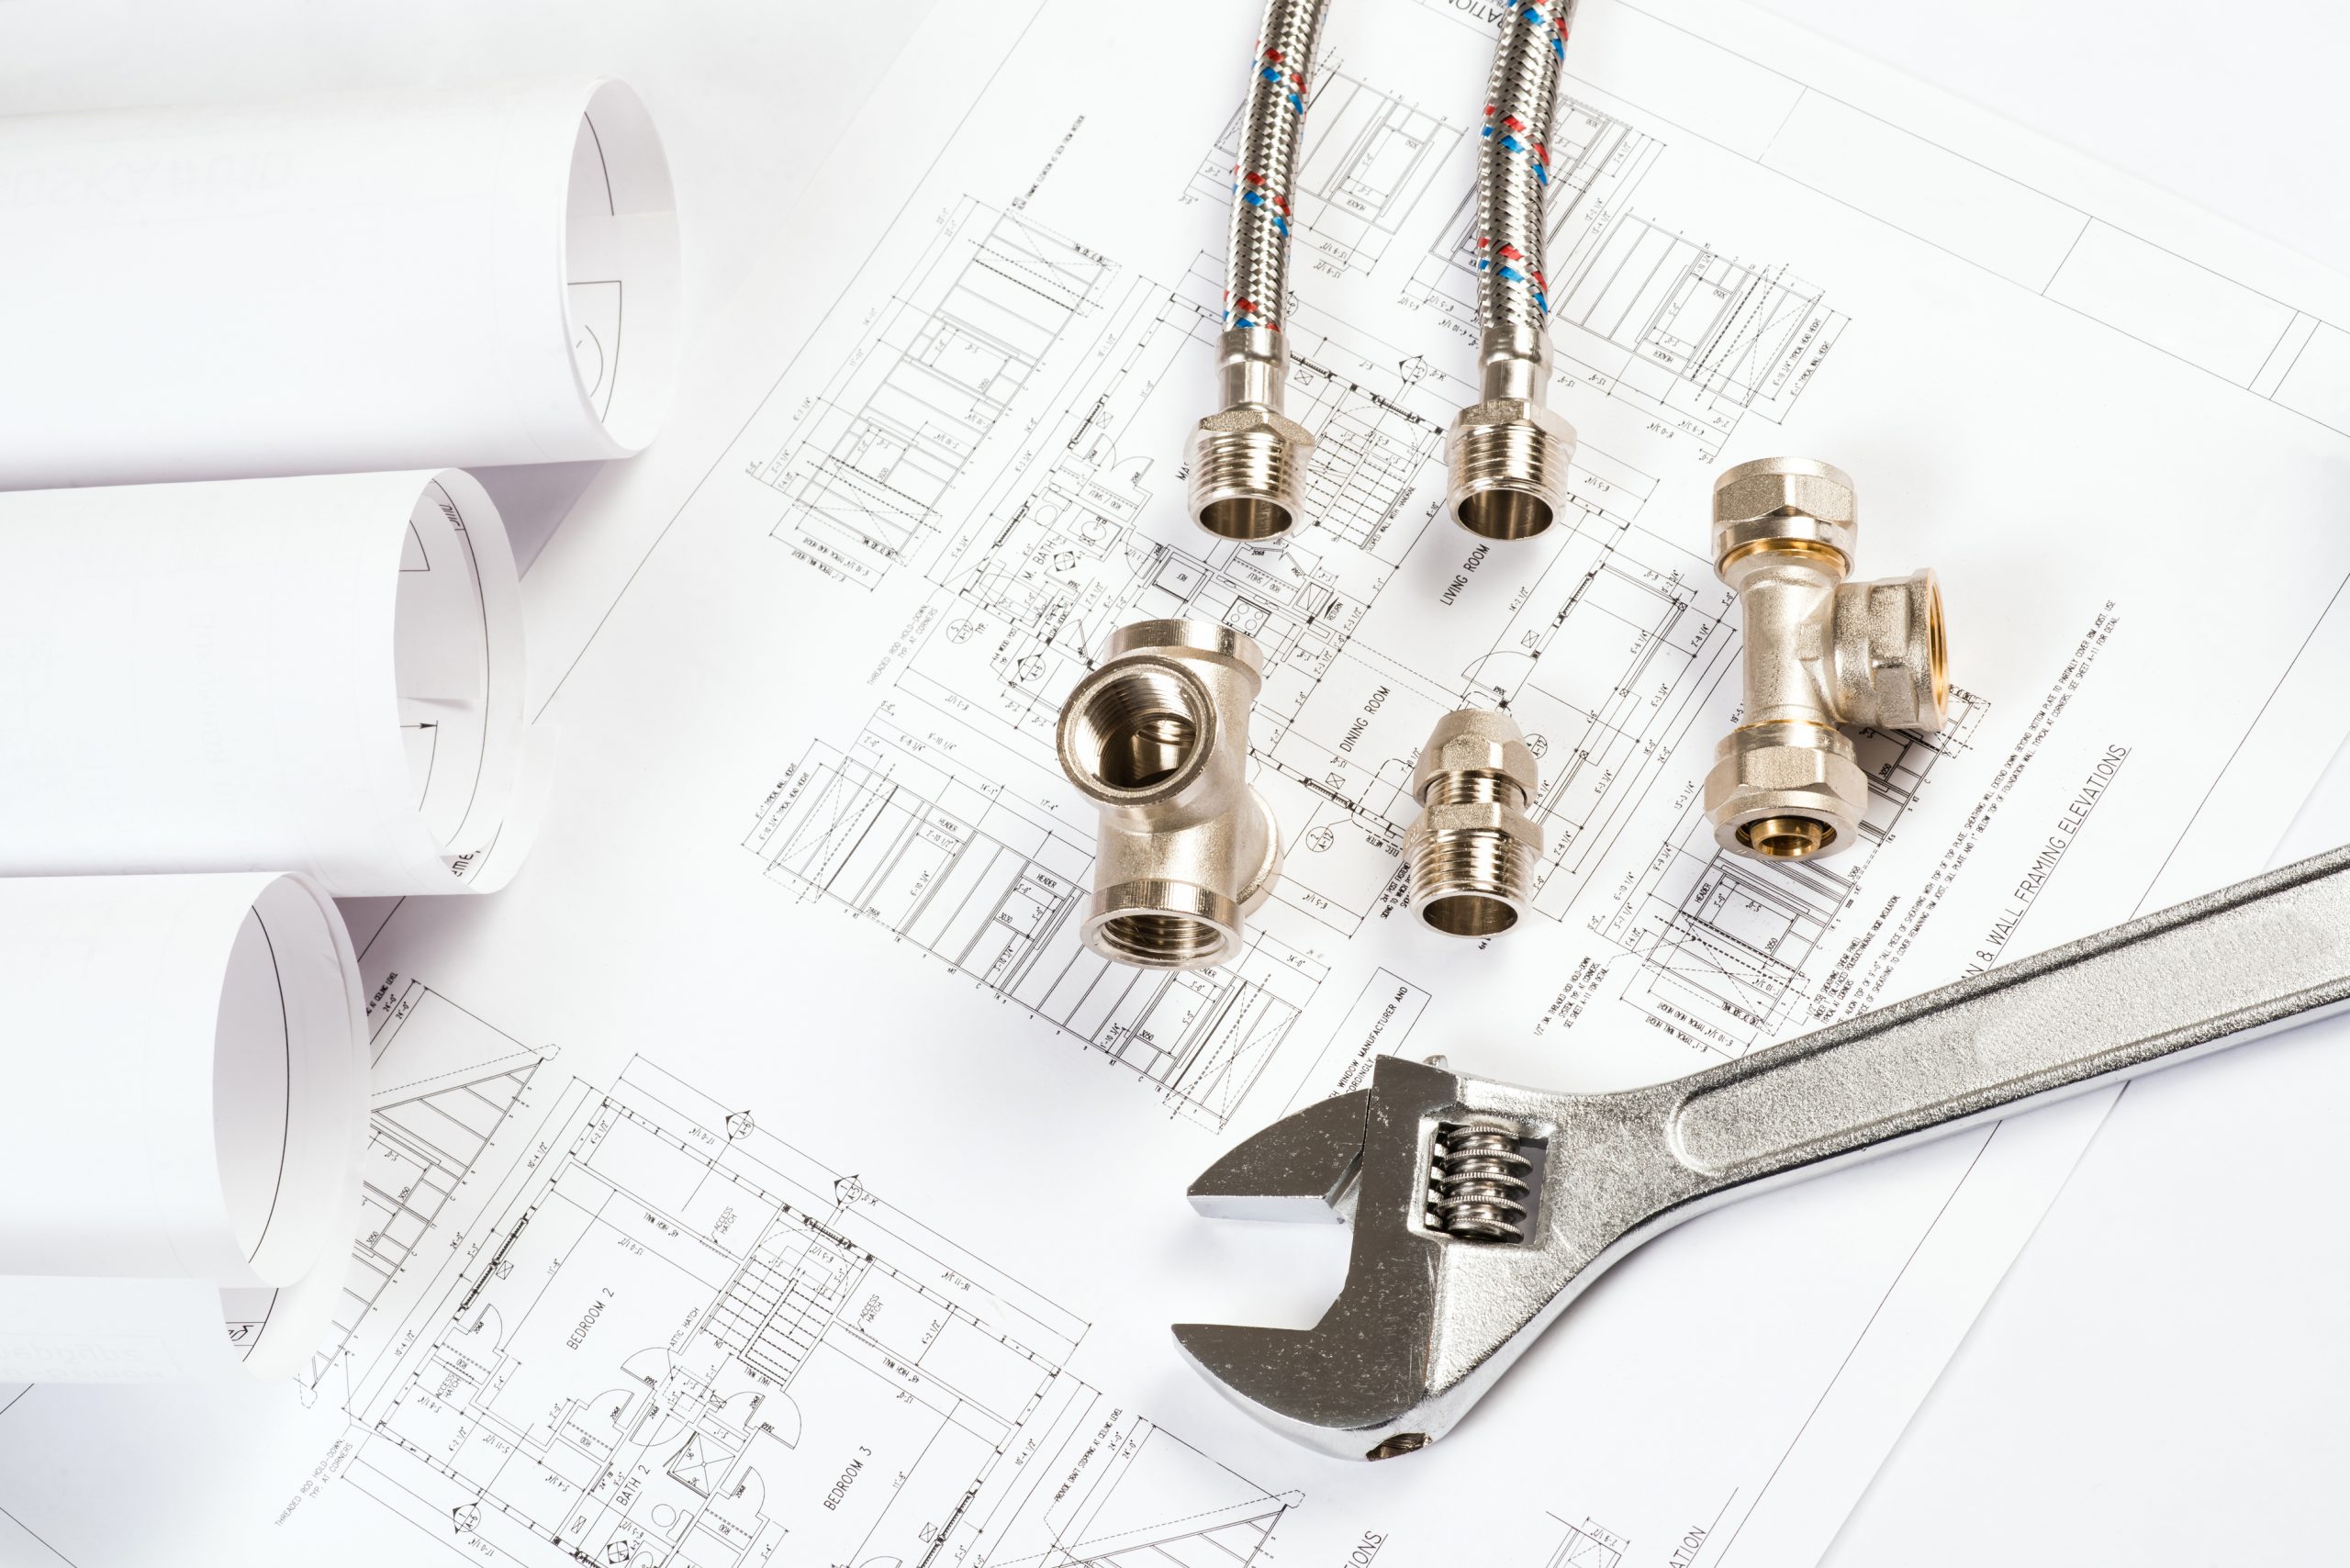 Perth Plumbing and Gasfitting Plumber tools on architect drawings Domestic & Commercial Plumbing Perth 